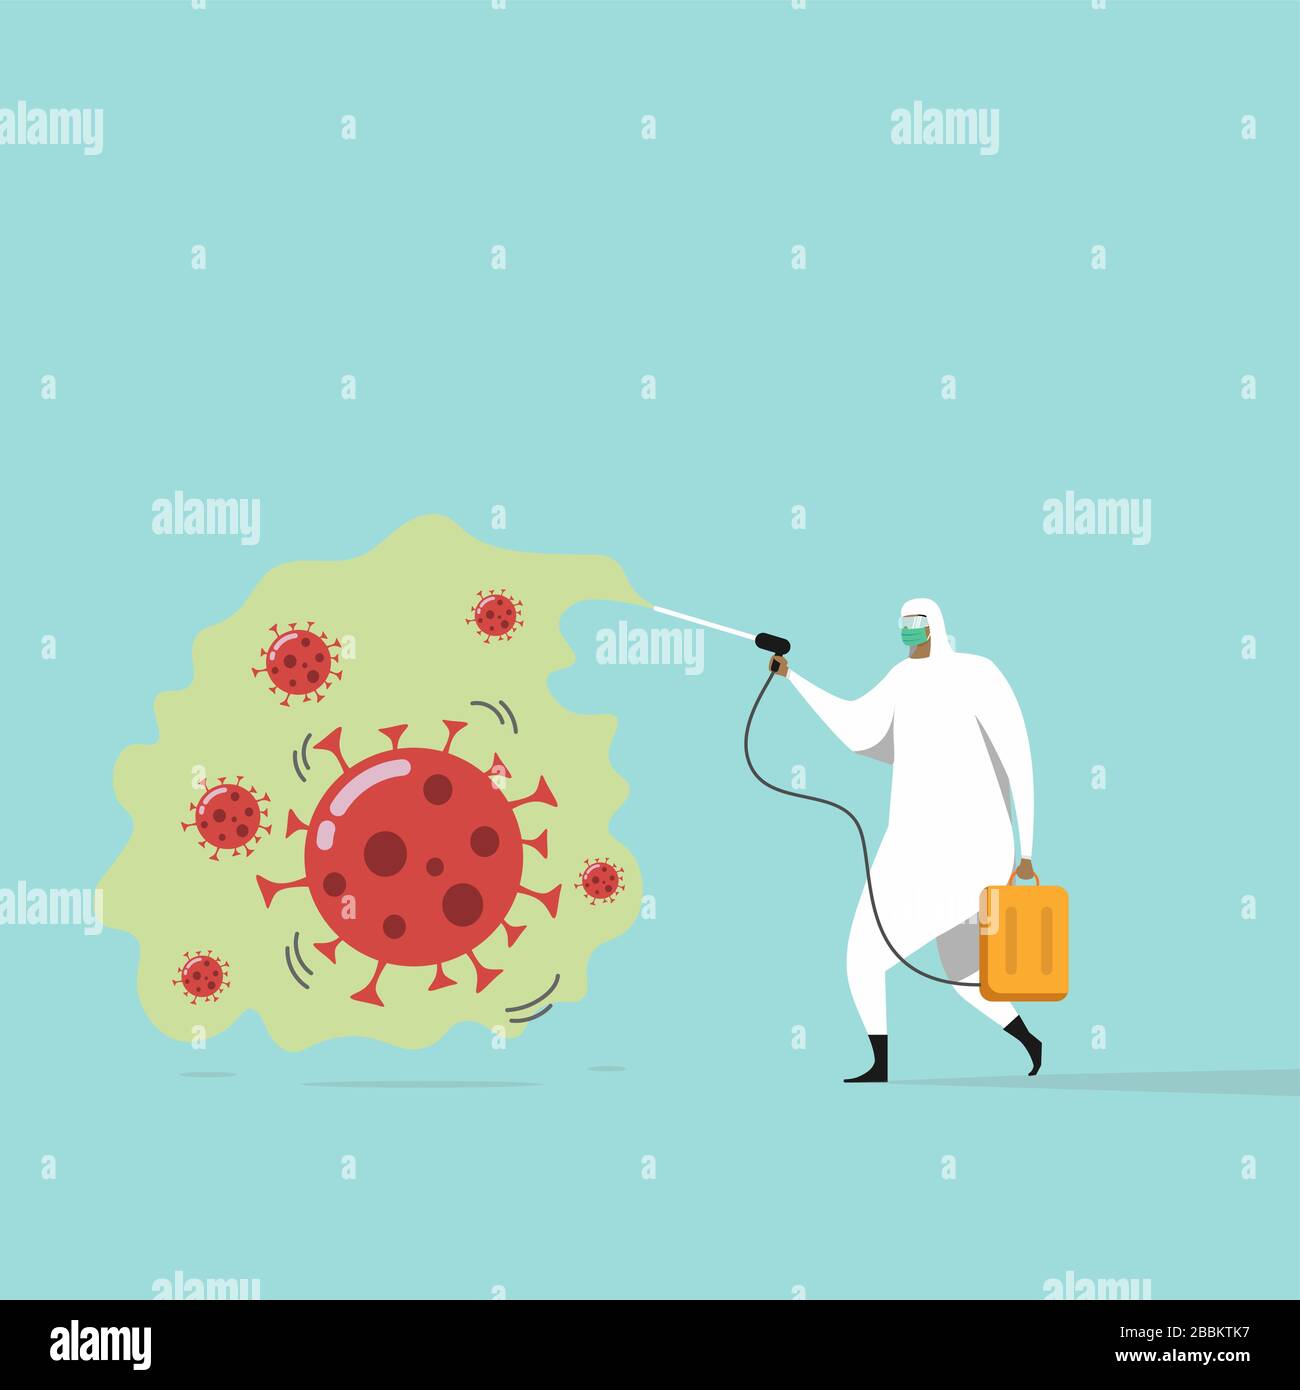 medical worker with full of personal protection equipment getting rid of coronavirus germs by spraying disinfectant COVID-19 virus pathogen, attempt t Stock Vector